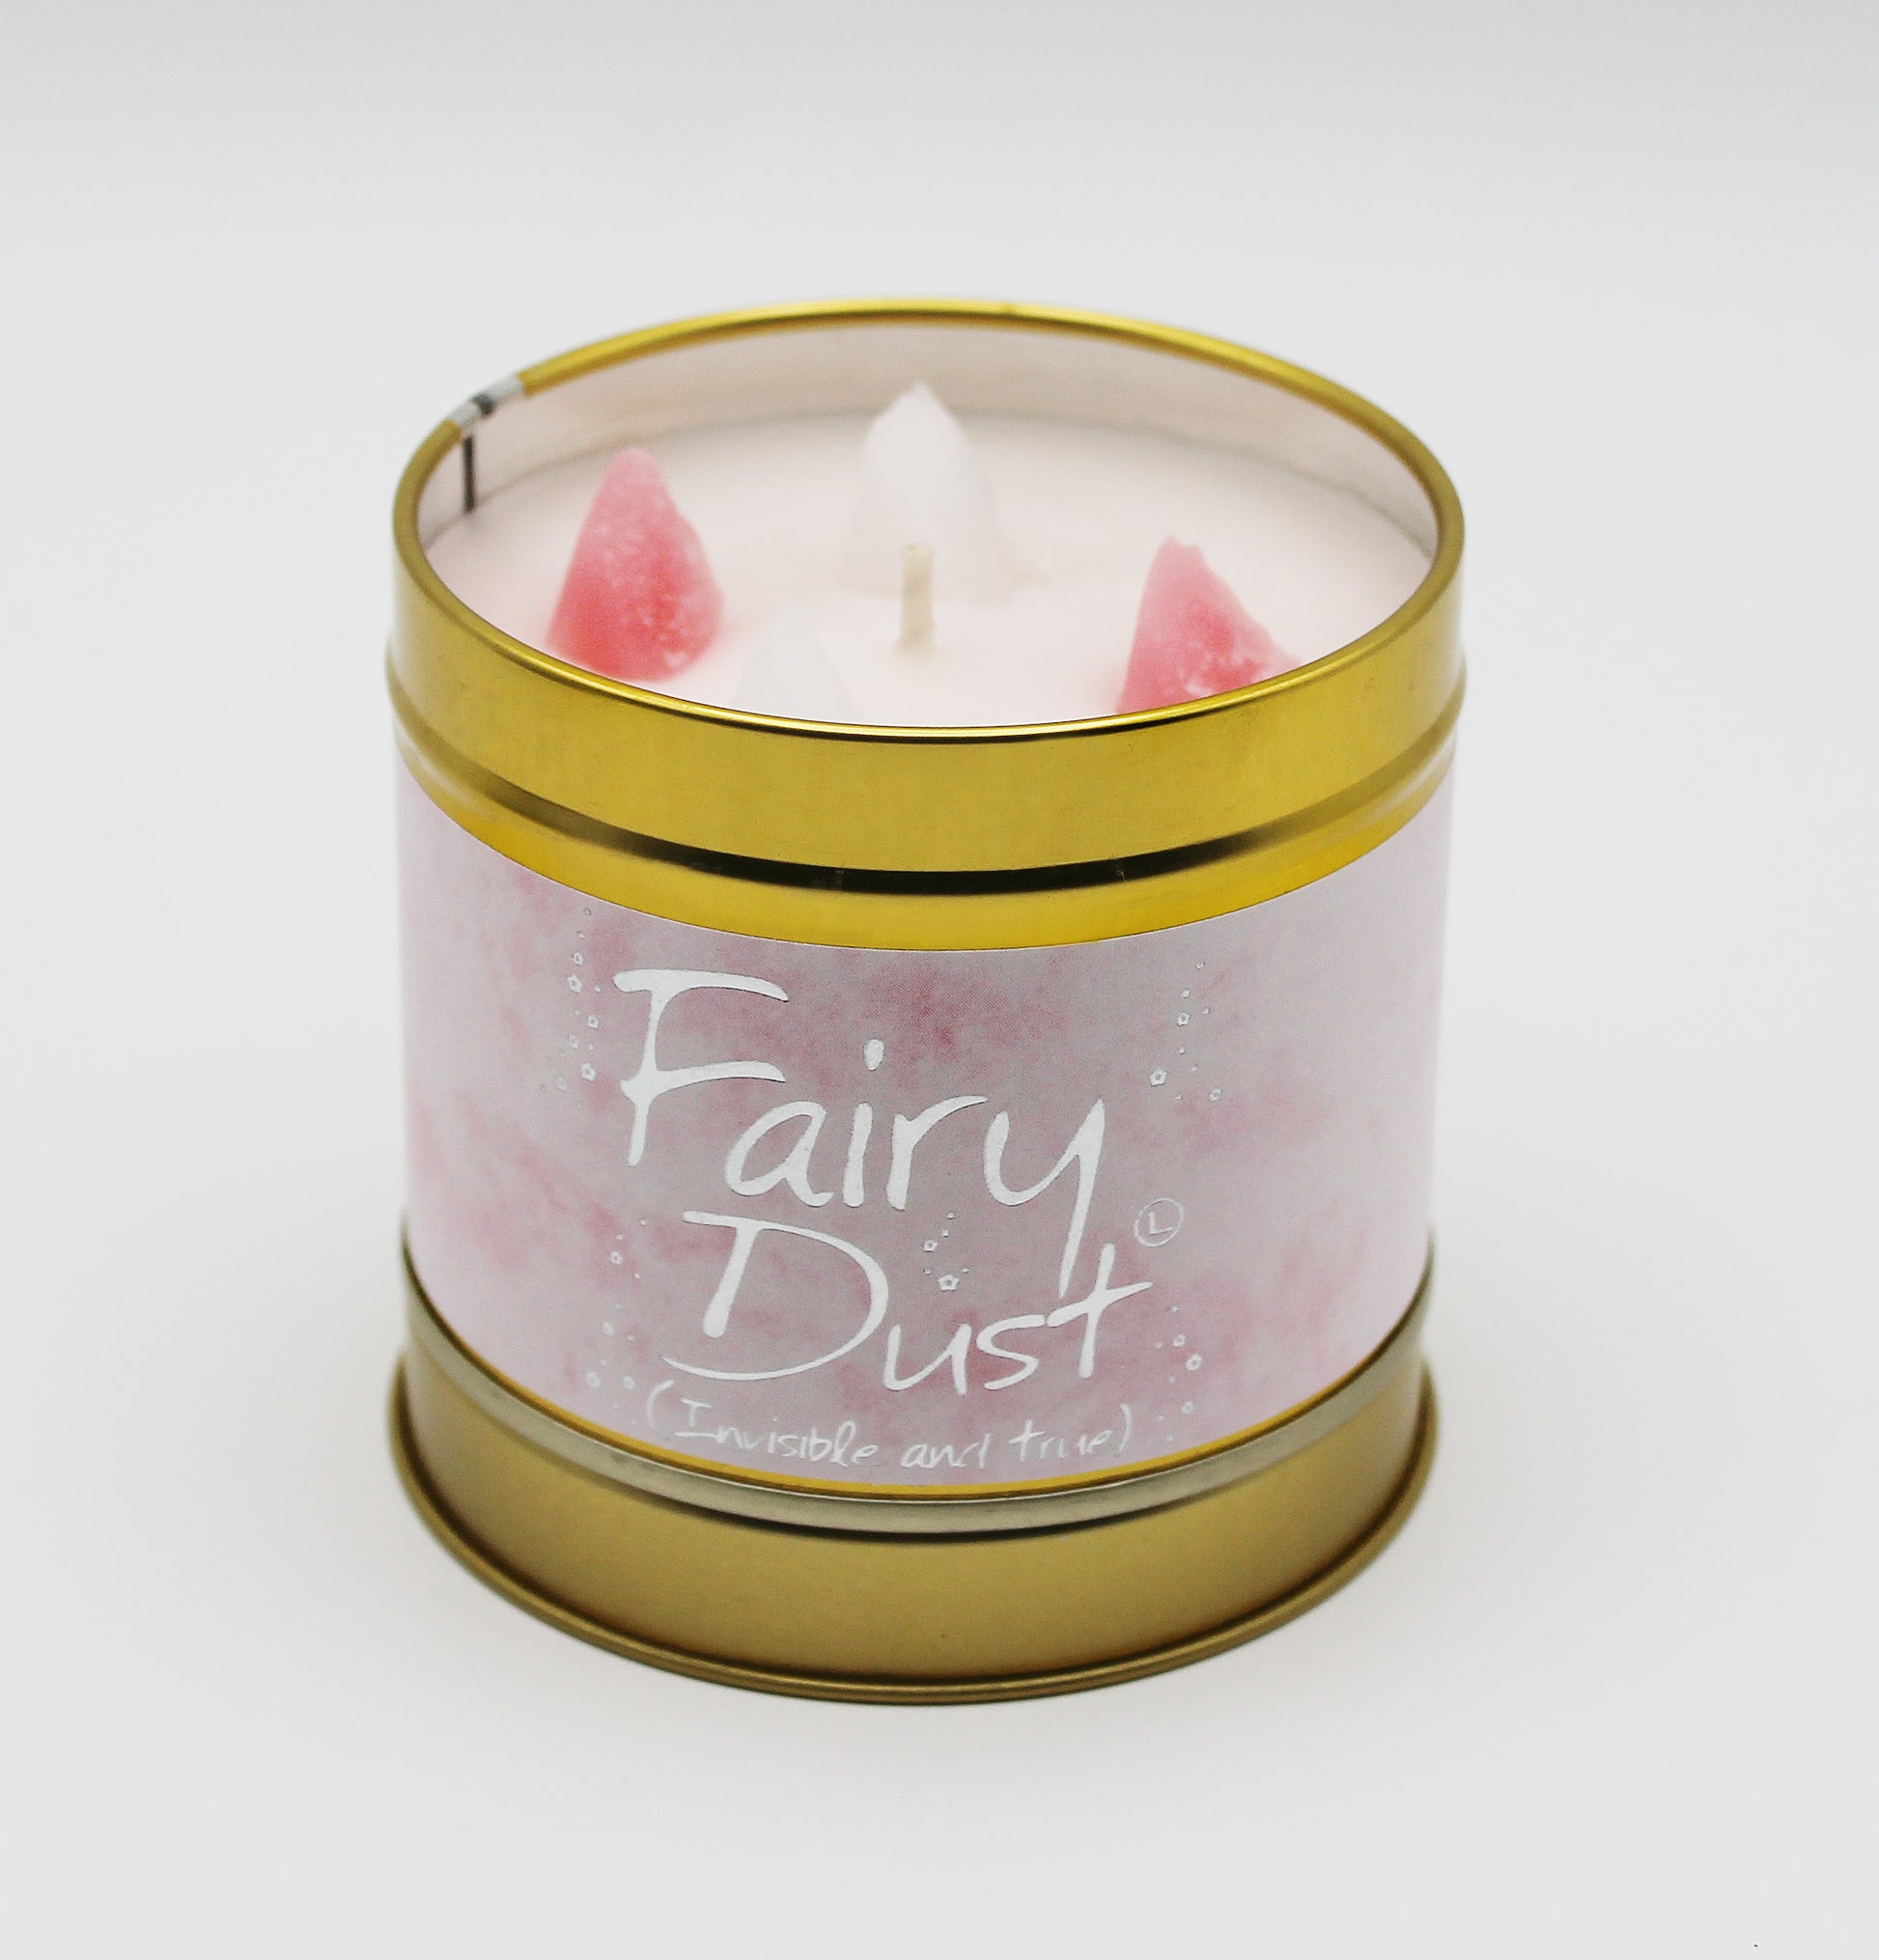 Fairy Dust Candle from the Giving Box